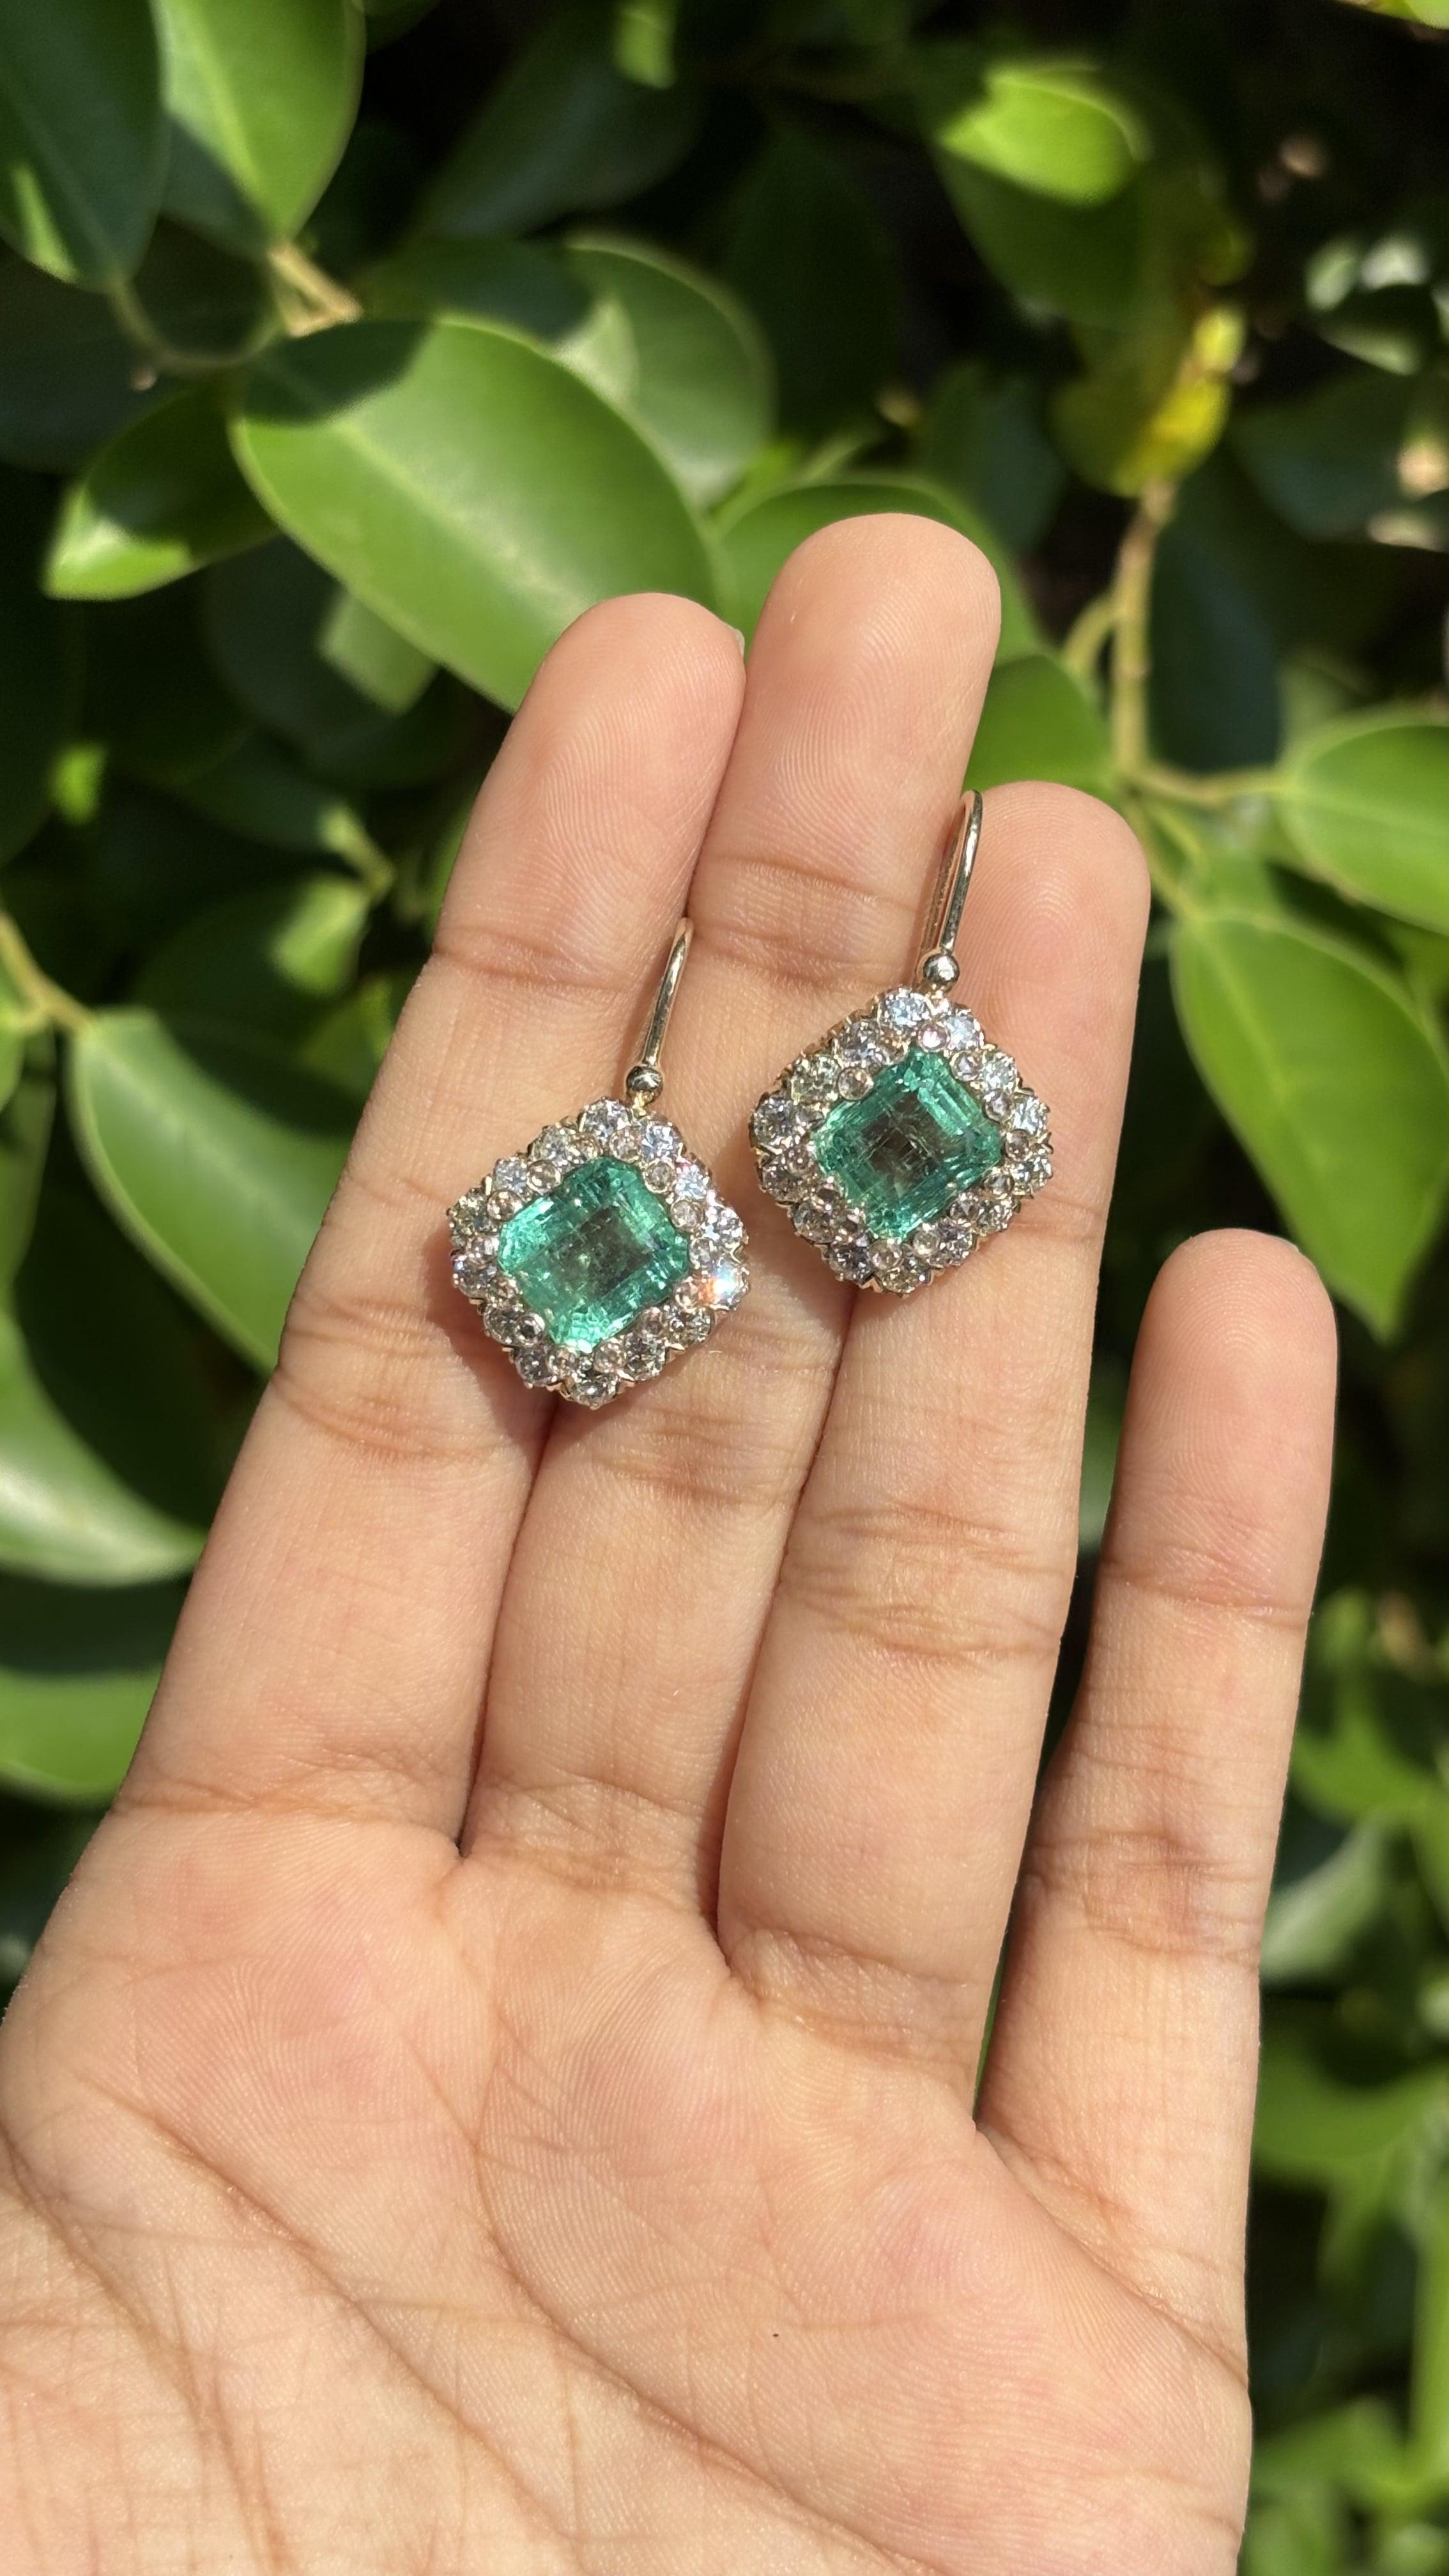 Introducing an exquisite masterpiece of elegance and sophistication from our beloved collection, these enchanting Emerald & Diamond drop earrings. Handcrafted with unparalleled craftsmanship, these top-quality earrings are a testament to the